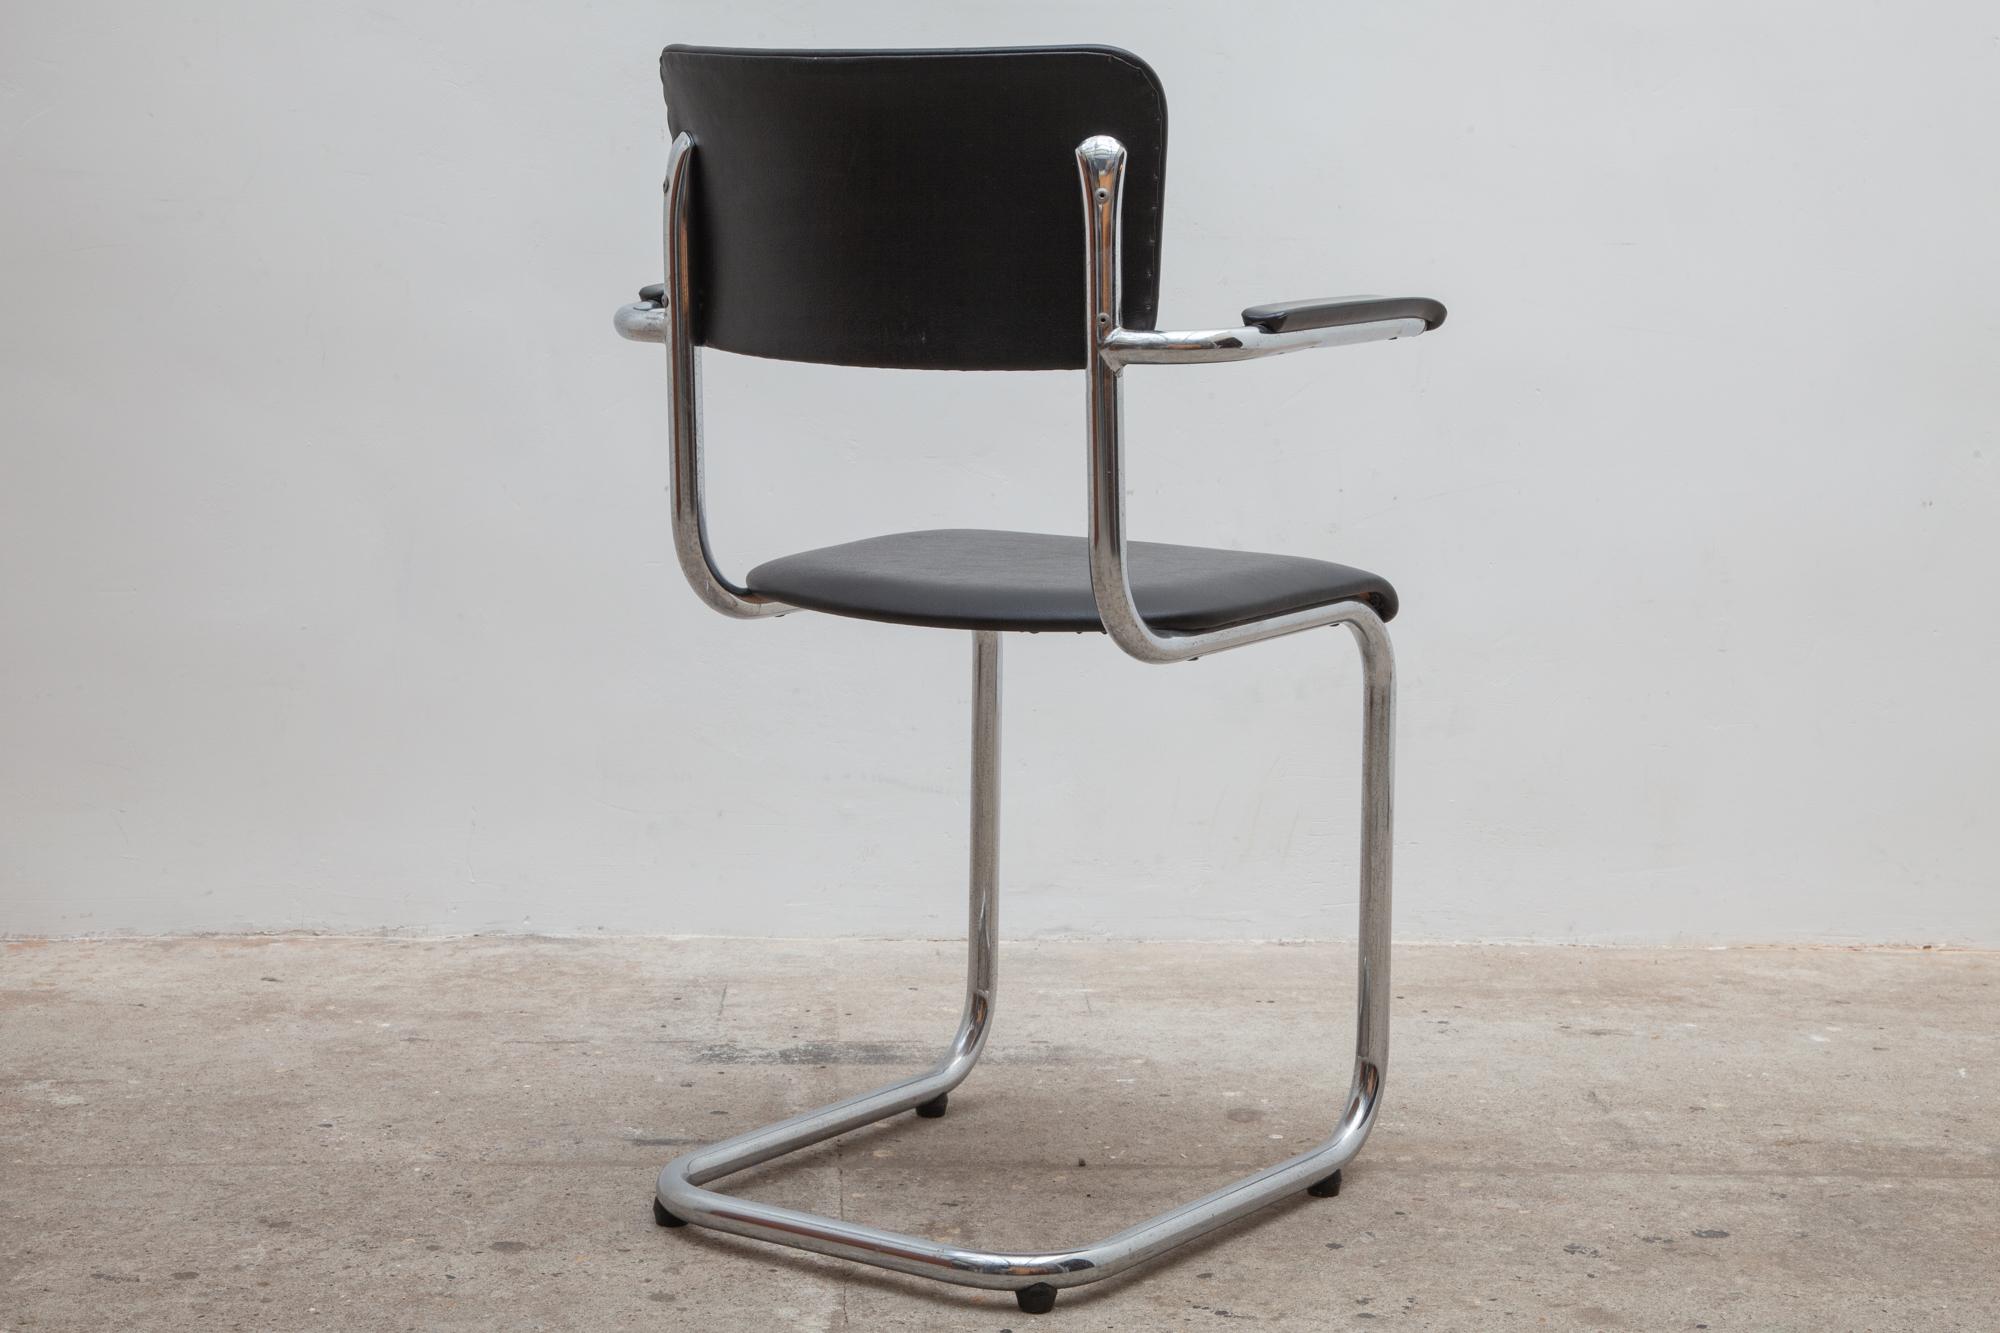 Four chairs by Tubax, Belgium. Bent chrome frames with bakelite armrests. Black vinyl upholstery in excellent condition.

Dimensions: 55 W x 84 H x 42 D cm - Seat: 45 cm high.8 pieces.